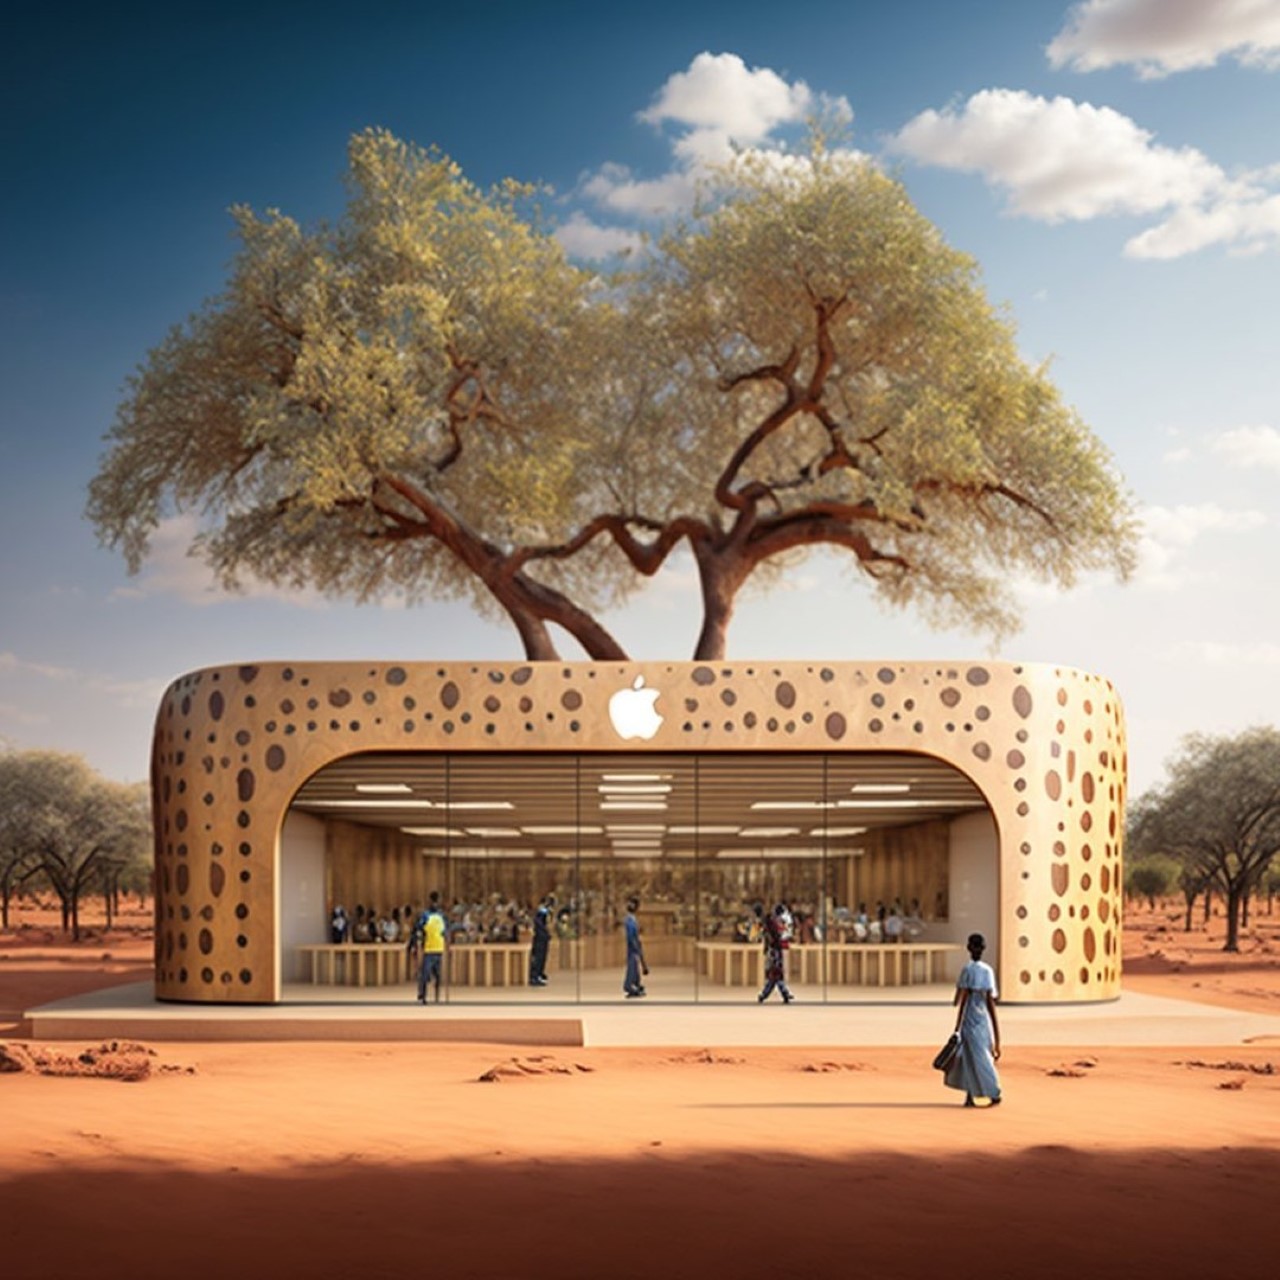 Designer depicts Apple Stores from around the world in different